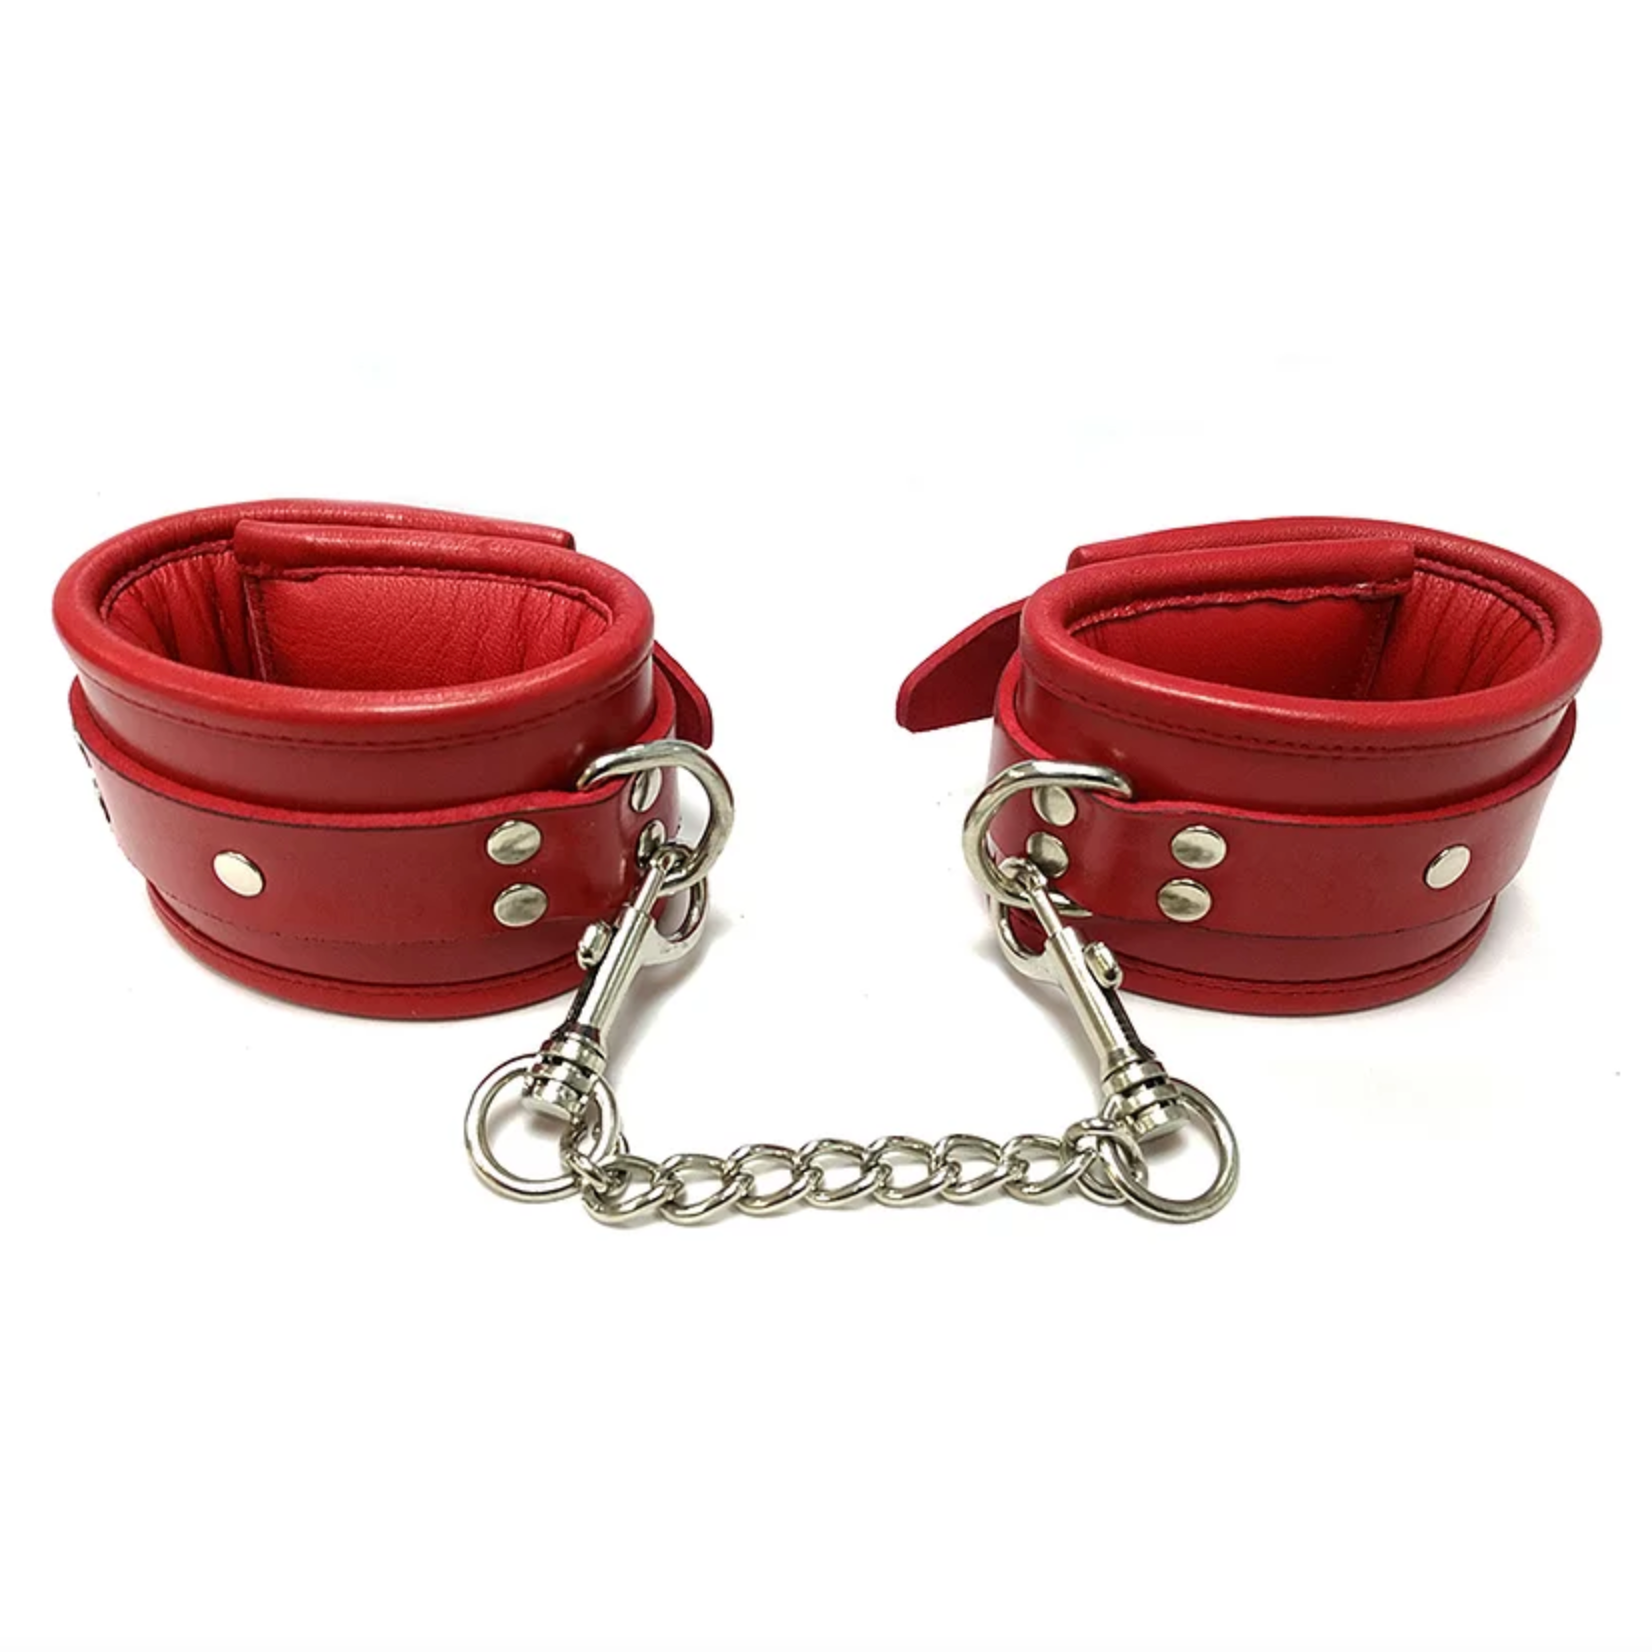 Padded Leather Wrist Cuffs Red (6853062885540)